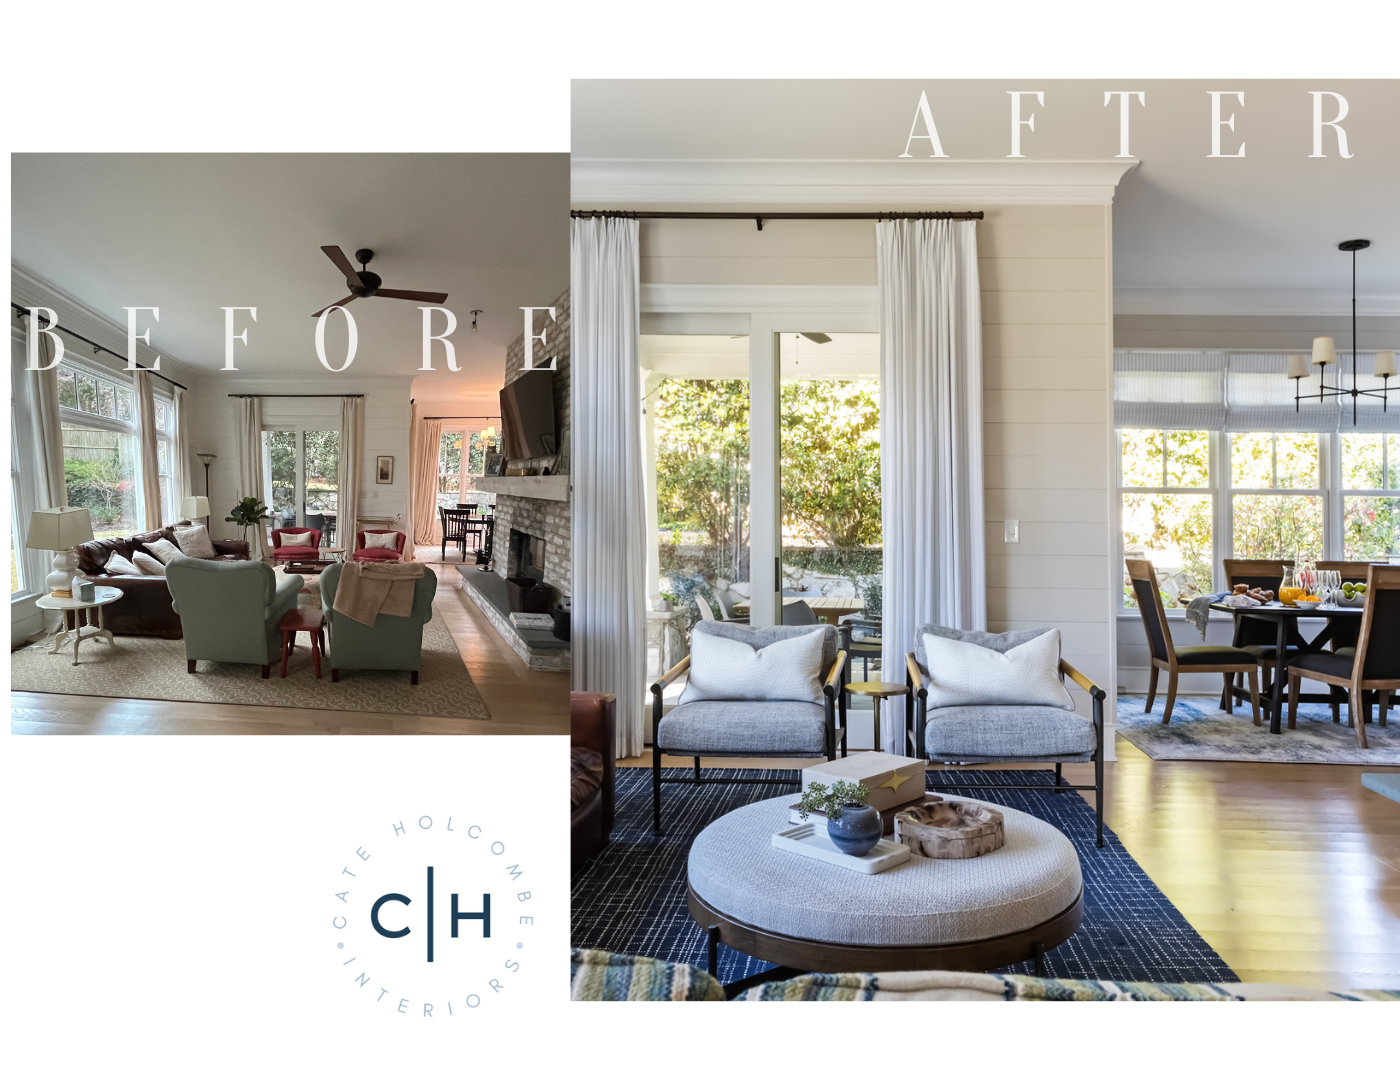 Before and After of a bright and airy living room and breakfast nook